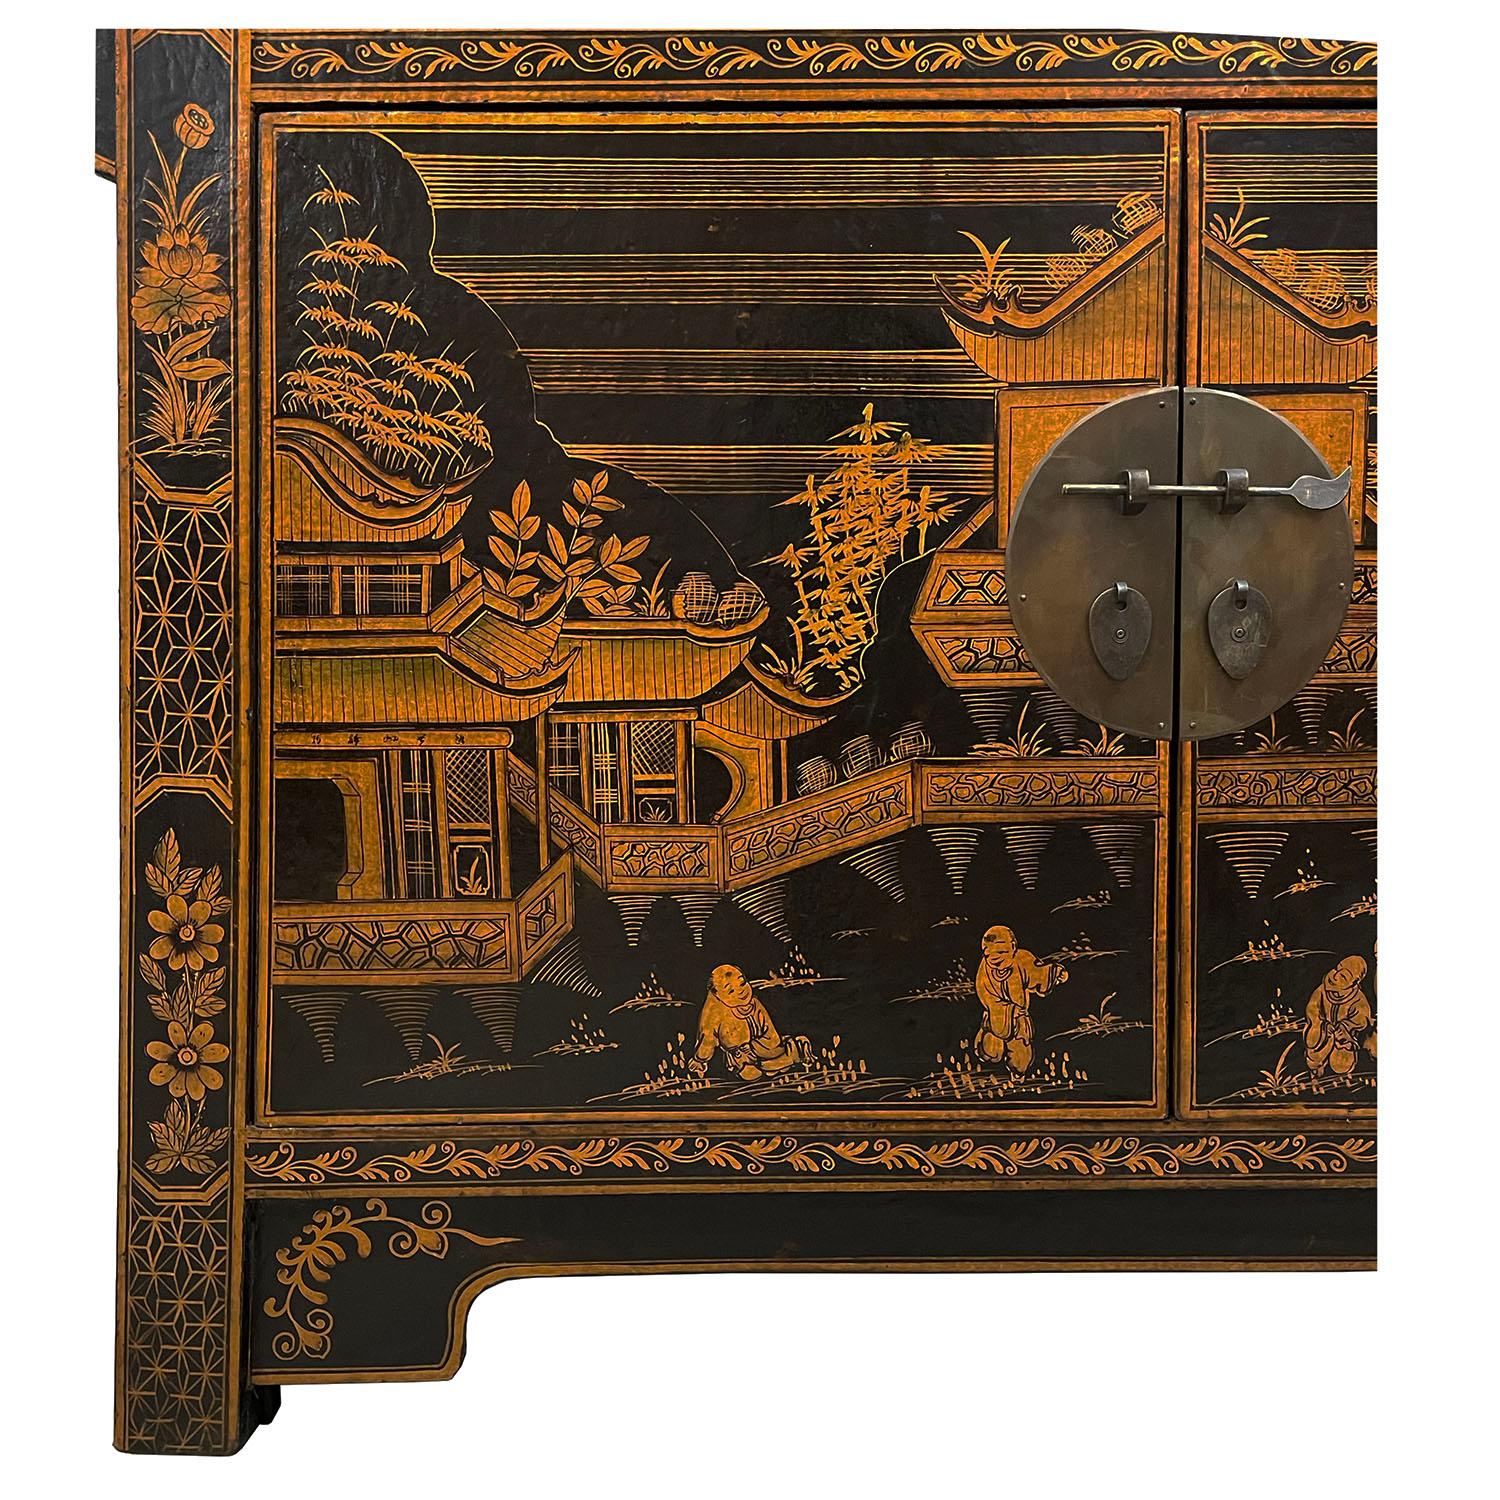 Early 20th Century Antique Chinese Lacquer Painted Altar Cabinet, Sideboard In Good Condition For Sale In Pomona, CA